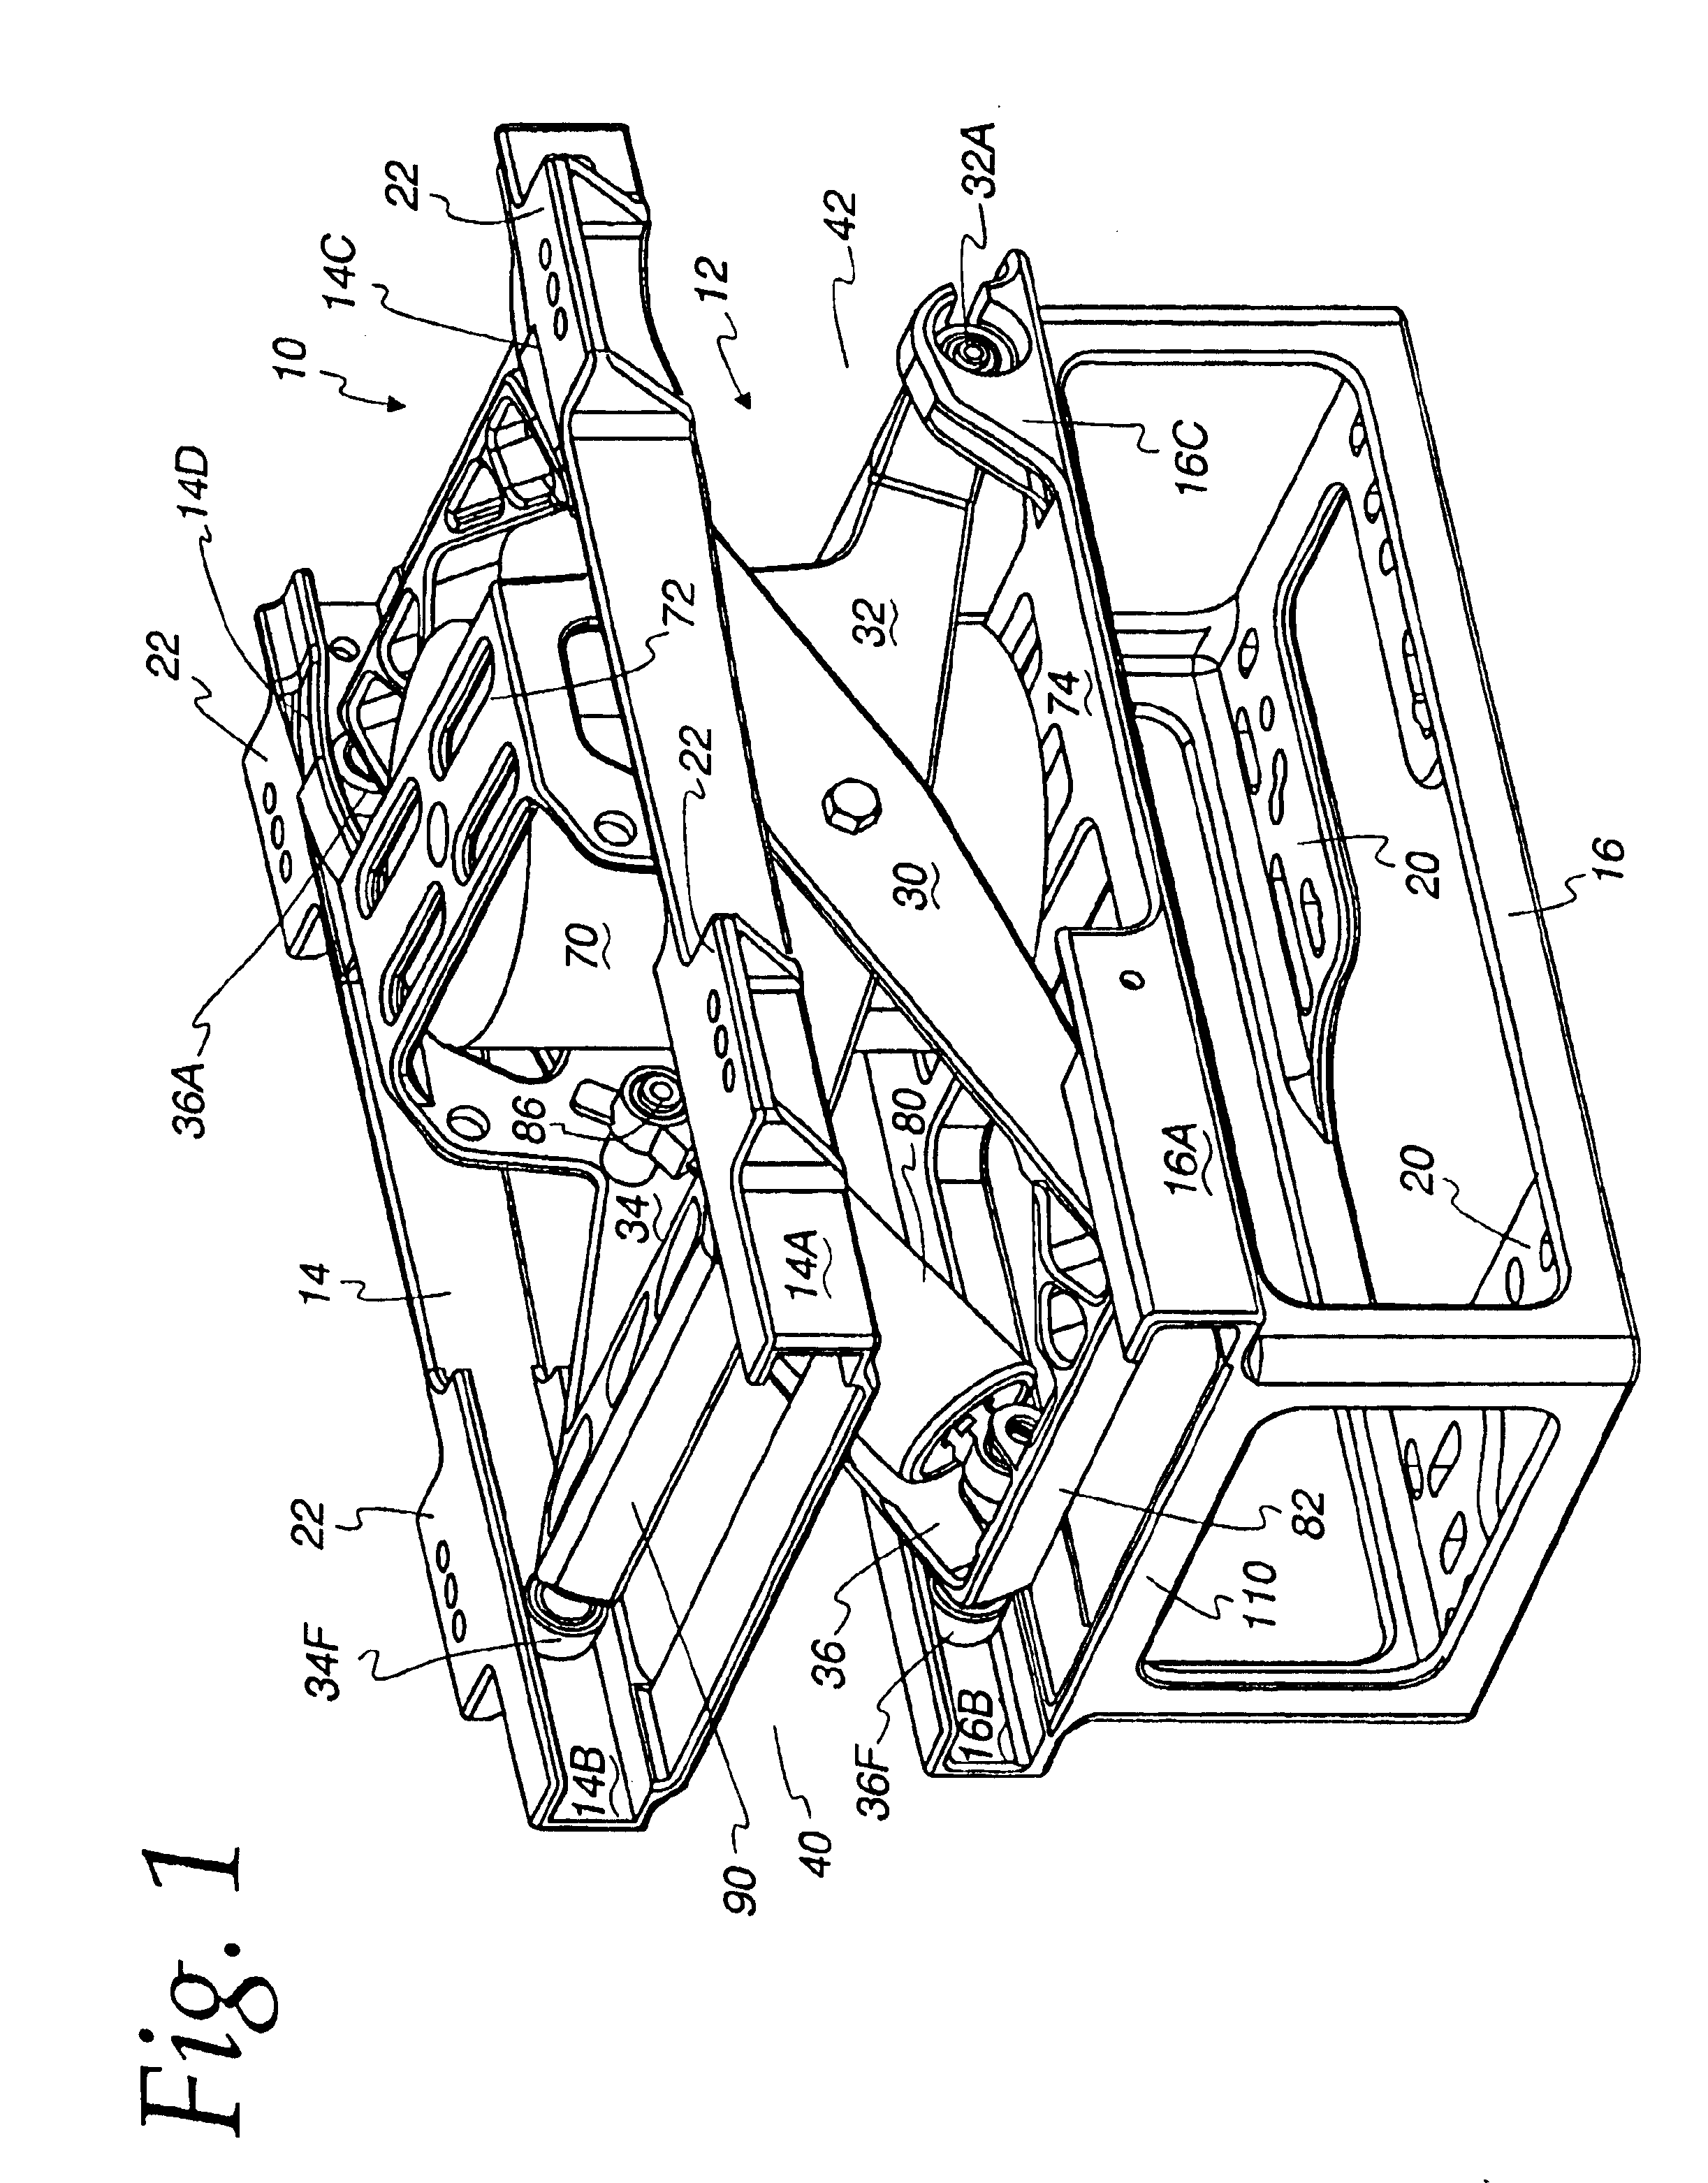 Vehicle seating system with improved vibration isolation